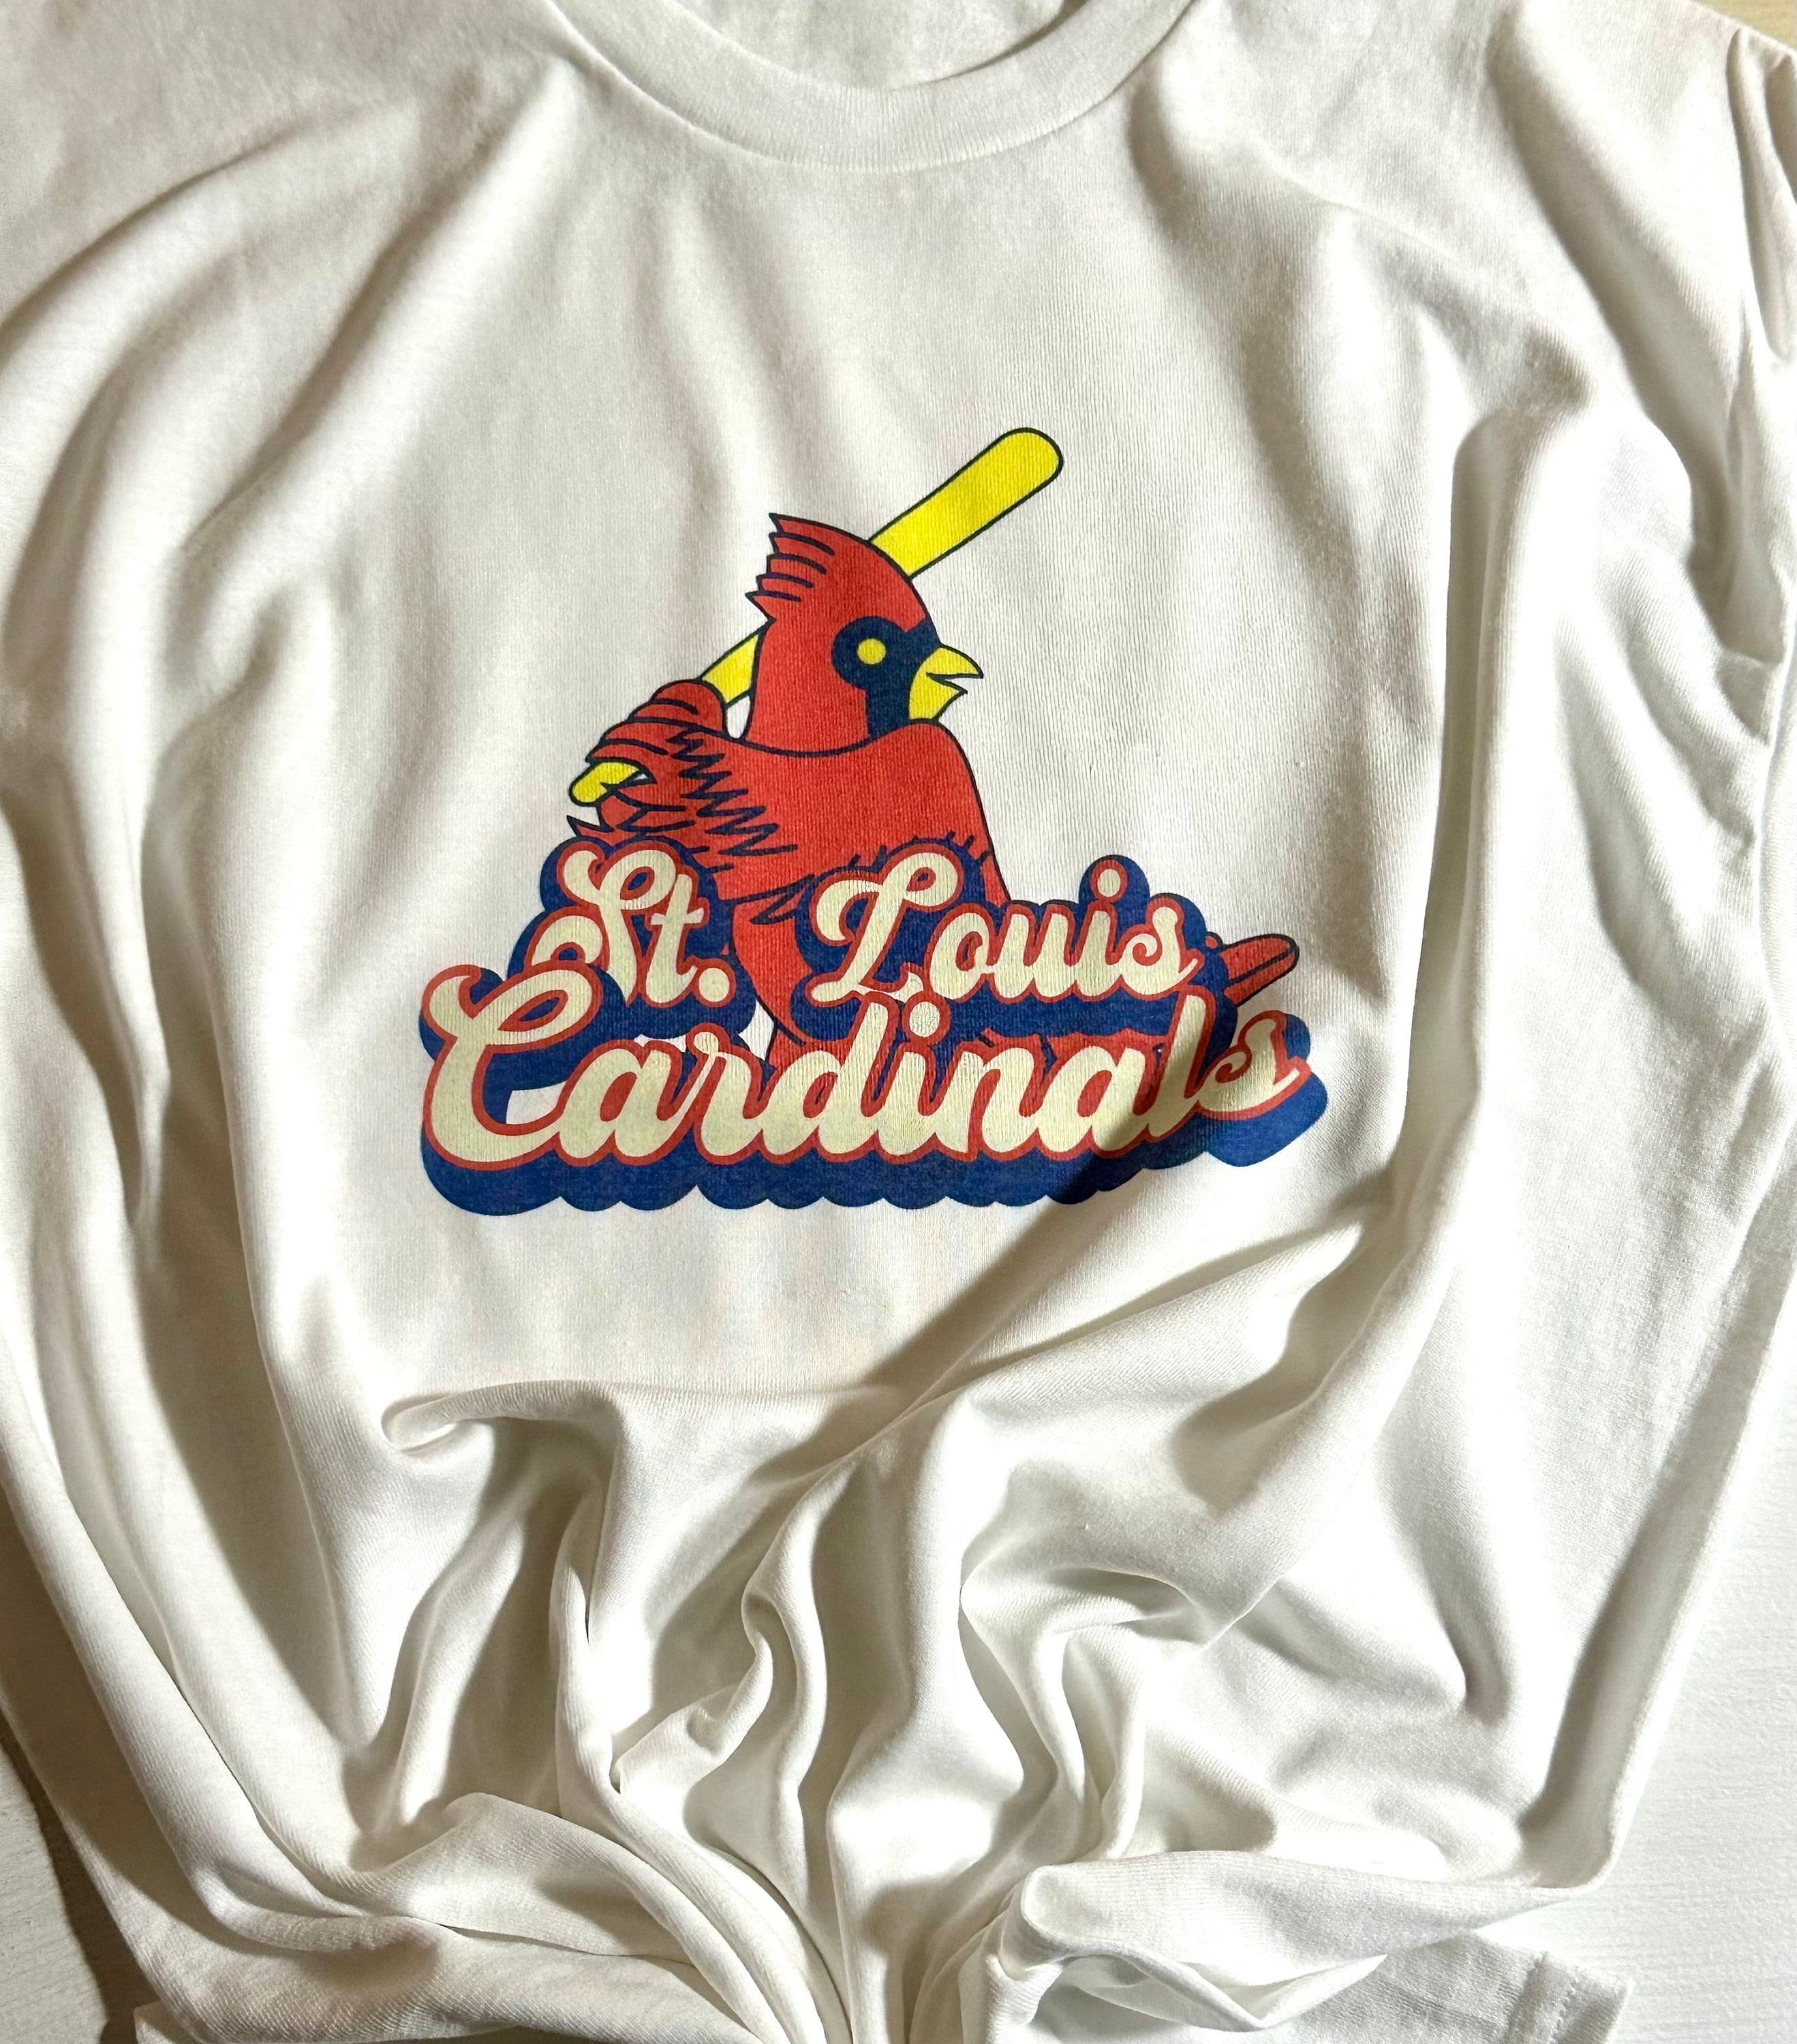 St. Louis Cardinals Baseball Team Signatures T-Shirt, Tshirt, Hoodie,  Sweatshirt, Long Sleeve, Youth, funny shirts, gift shirts, Graphic Tee »  Cool Gifts for You - Mfamilygift